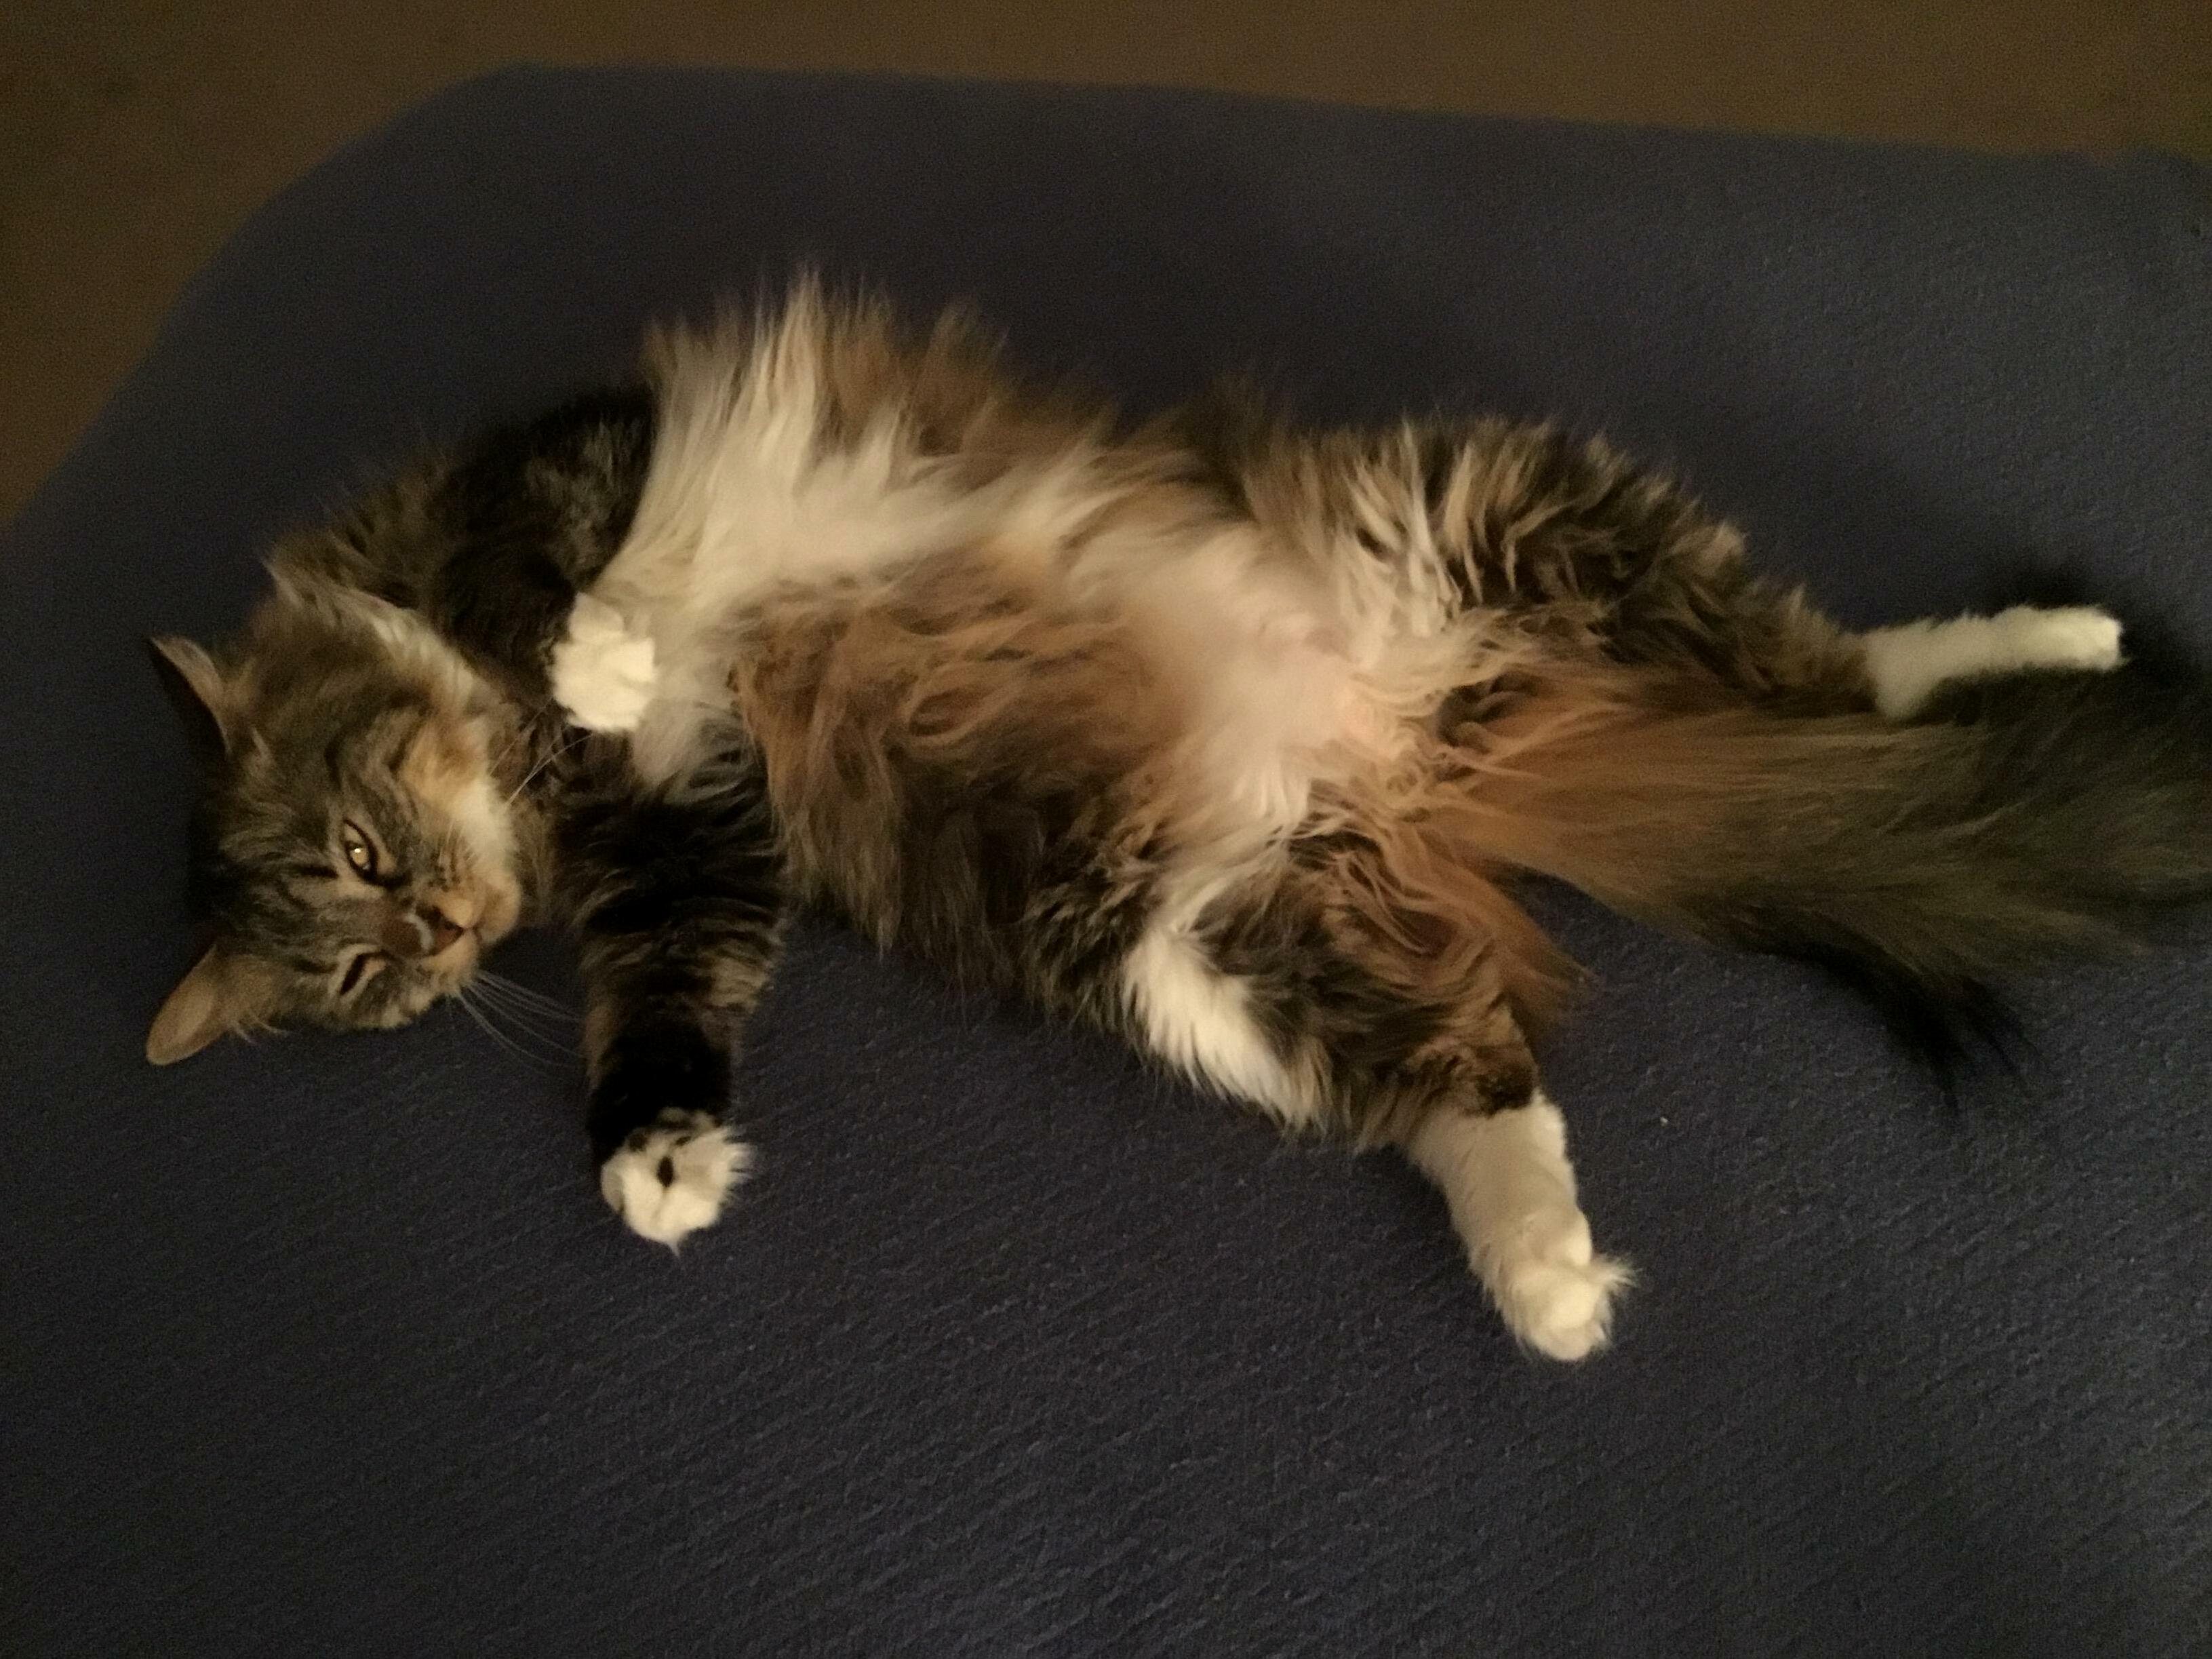 Gots to cool the belly……..